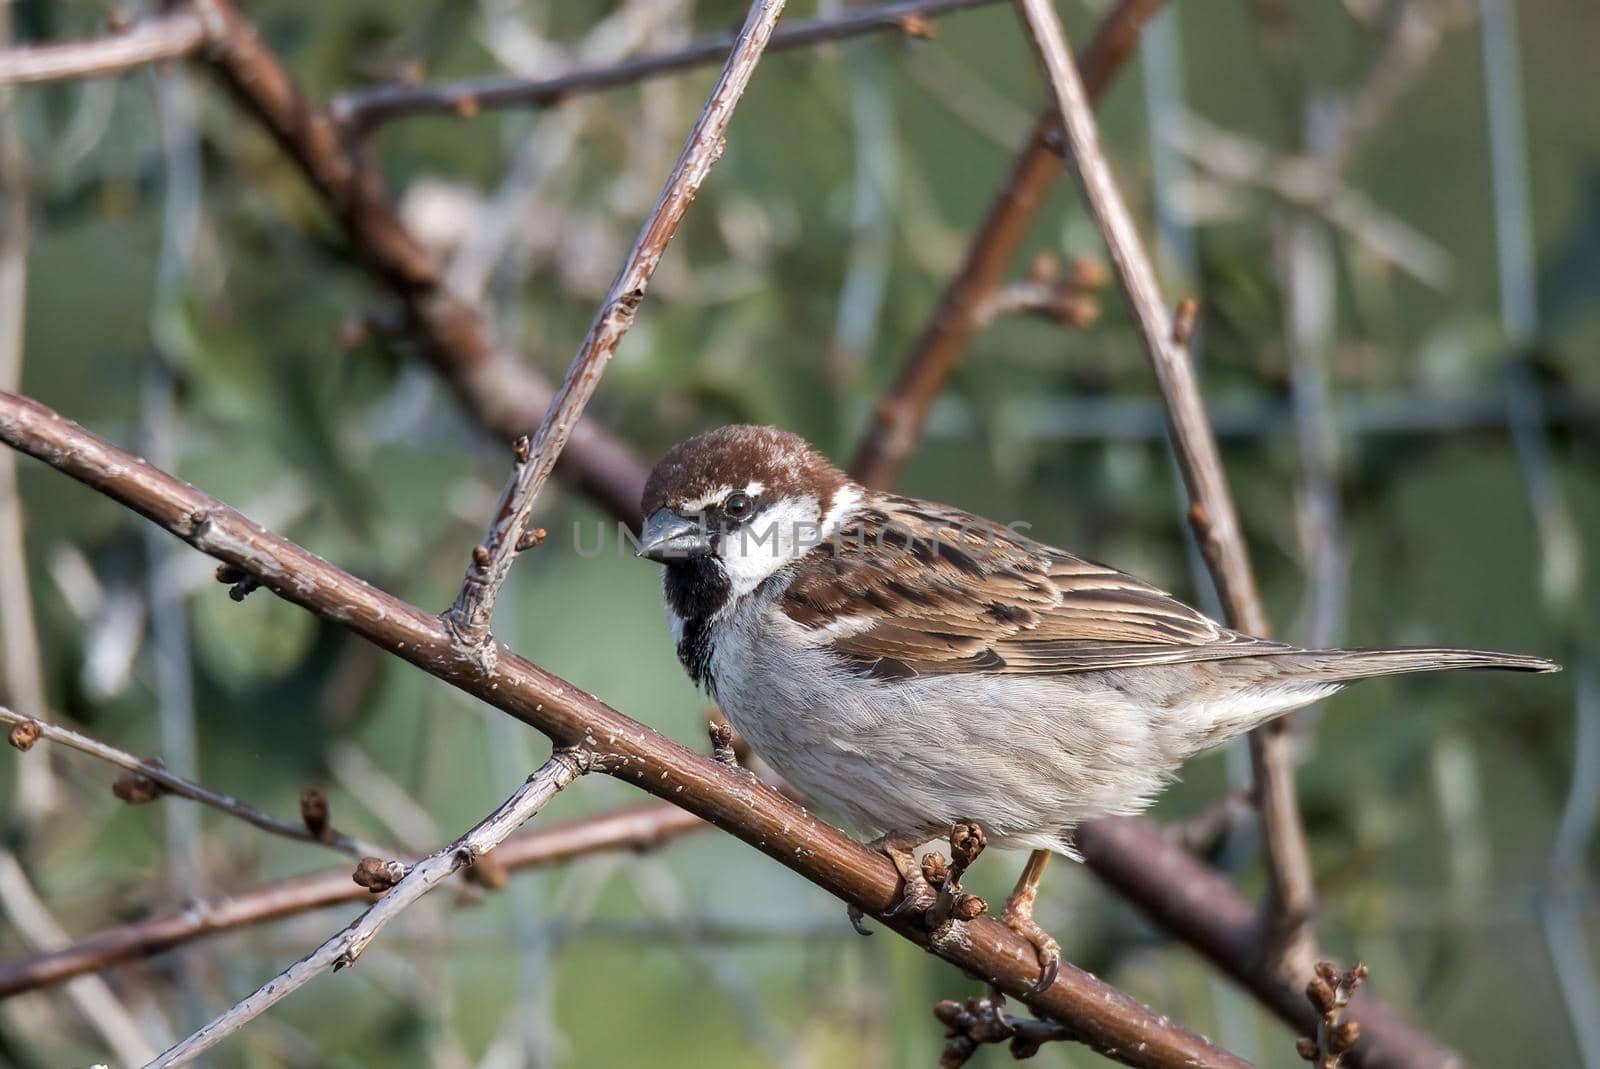 sparrow bird perched on a wood in search of food and water